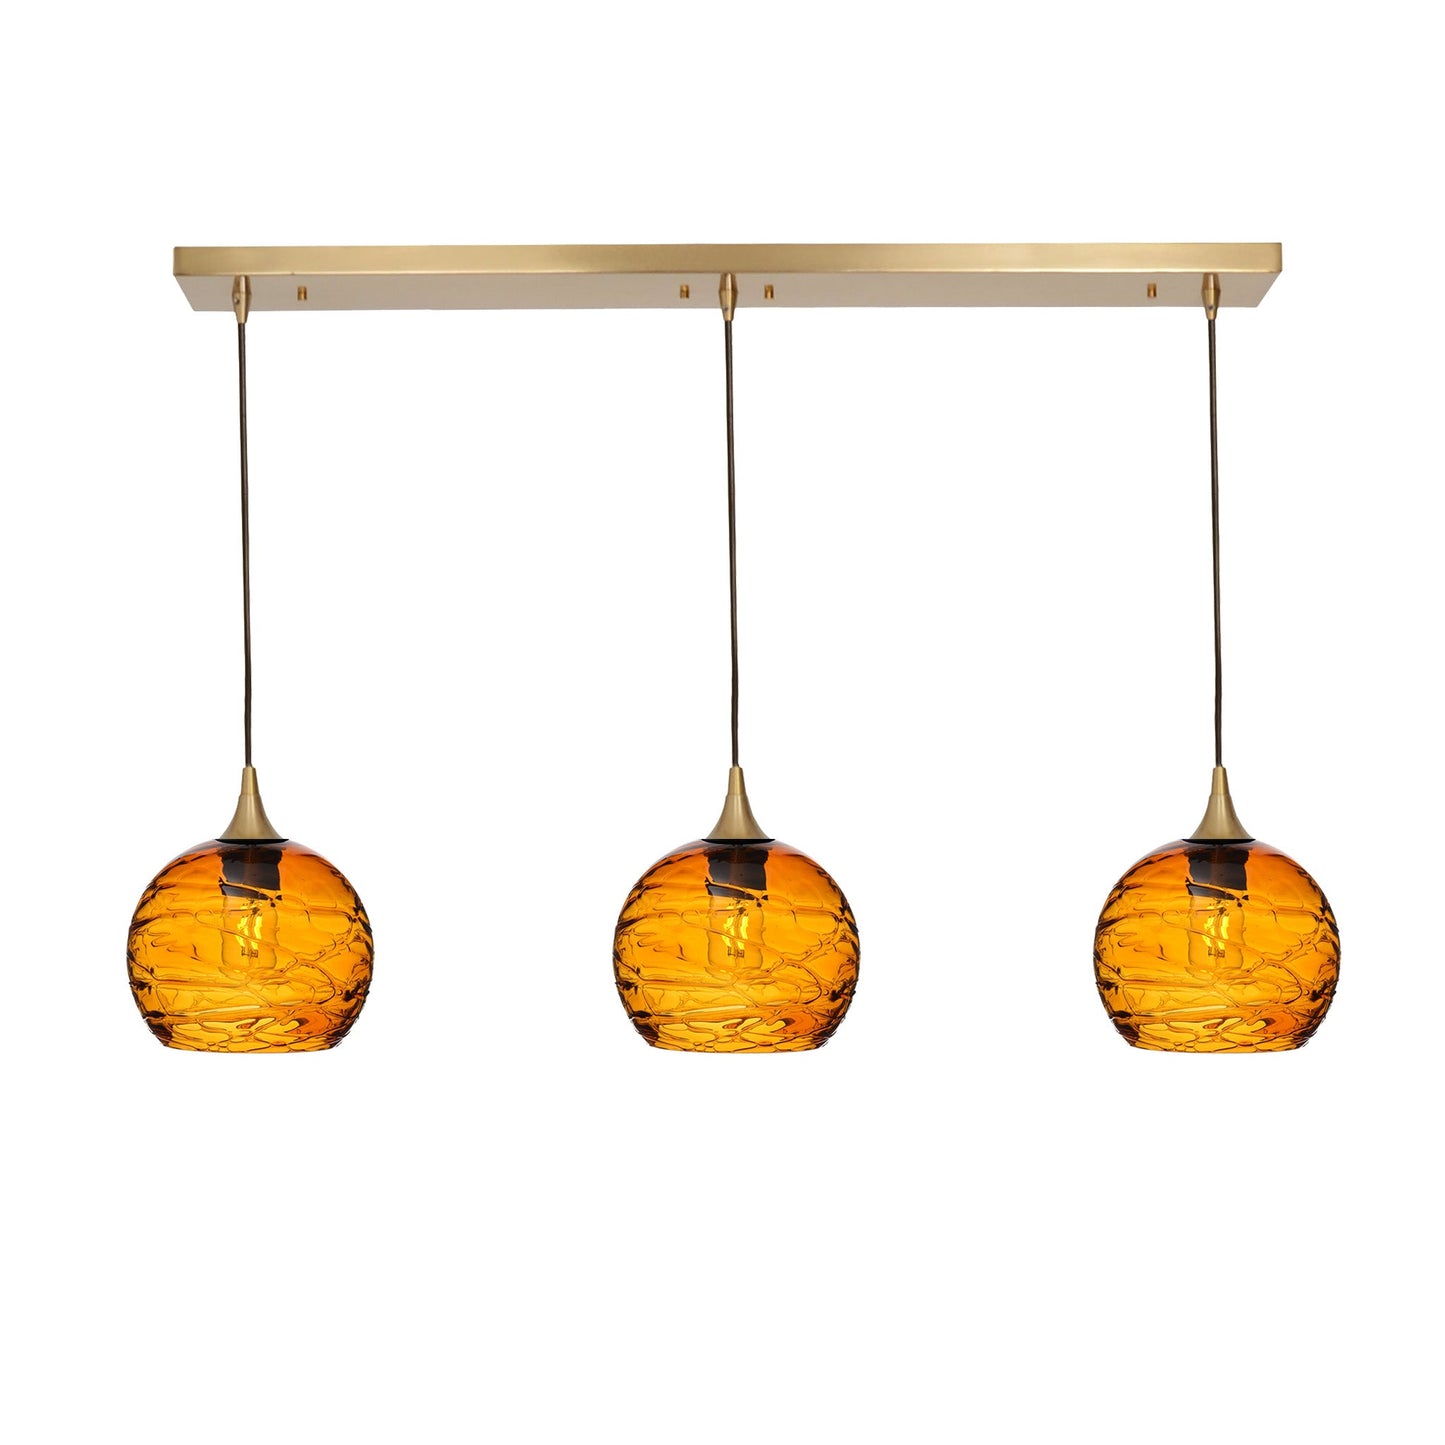 767 Spun: 3 Pendant Linear Chandelier-Glass-Bicycle Glass Co - Hotshop-Golden Amber-Polished Brass-Bicycle Glass Co